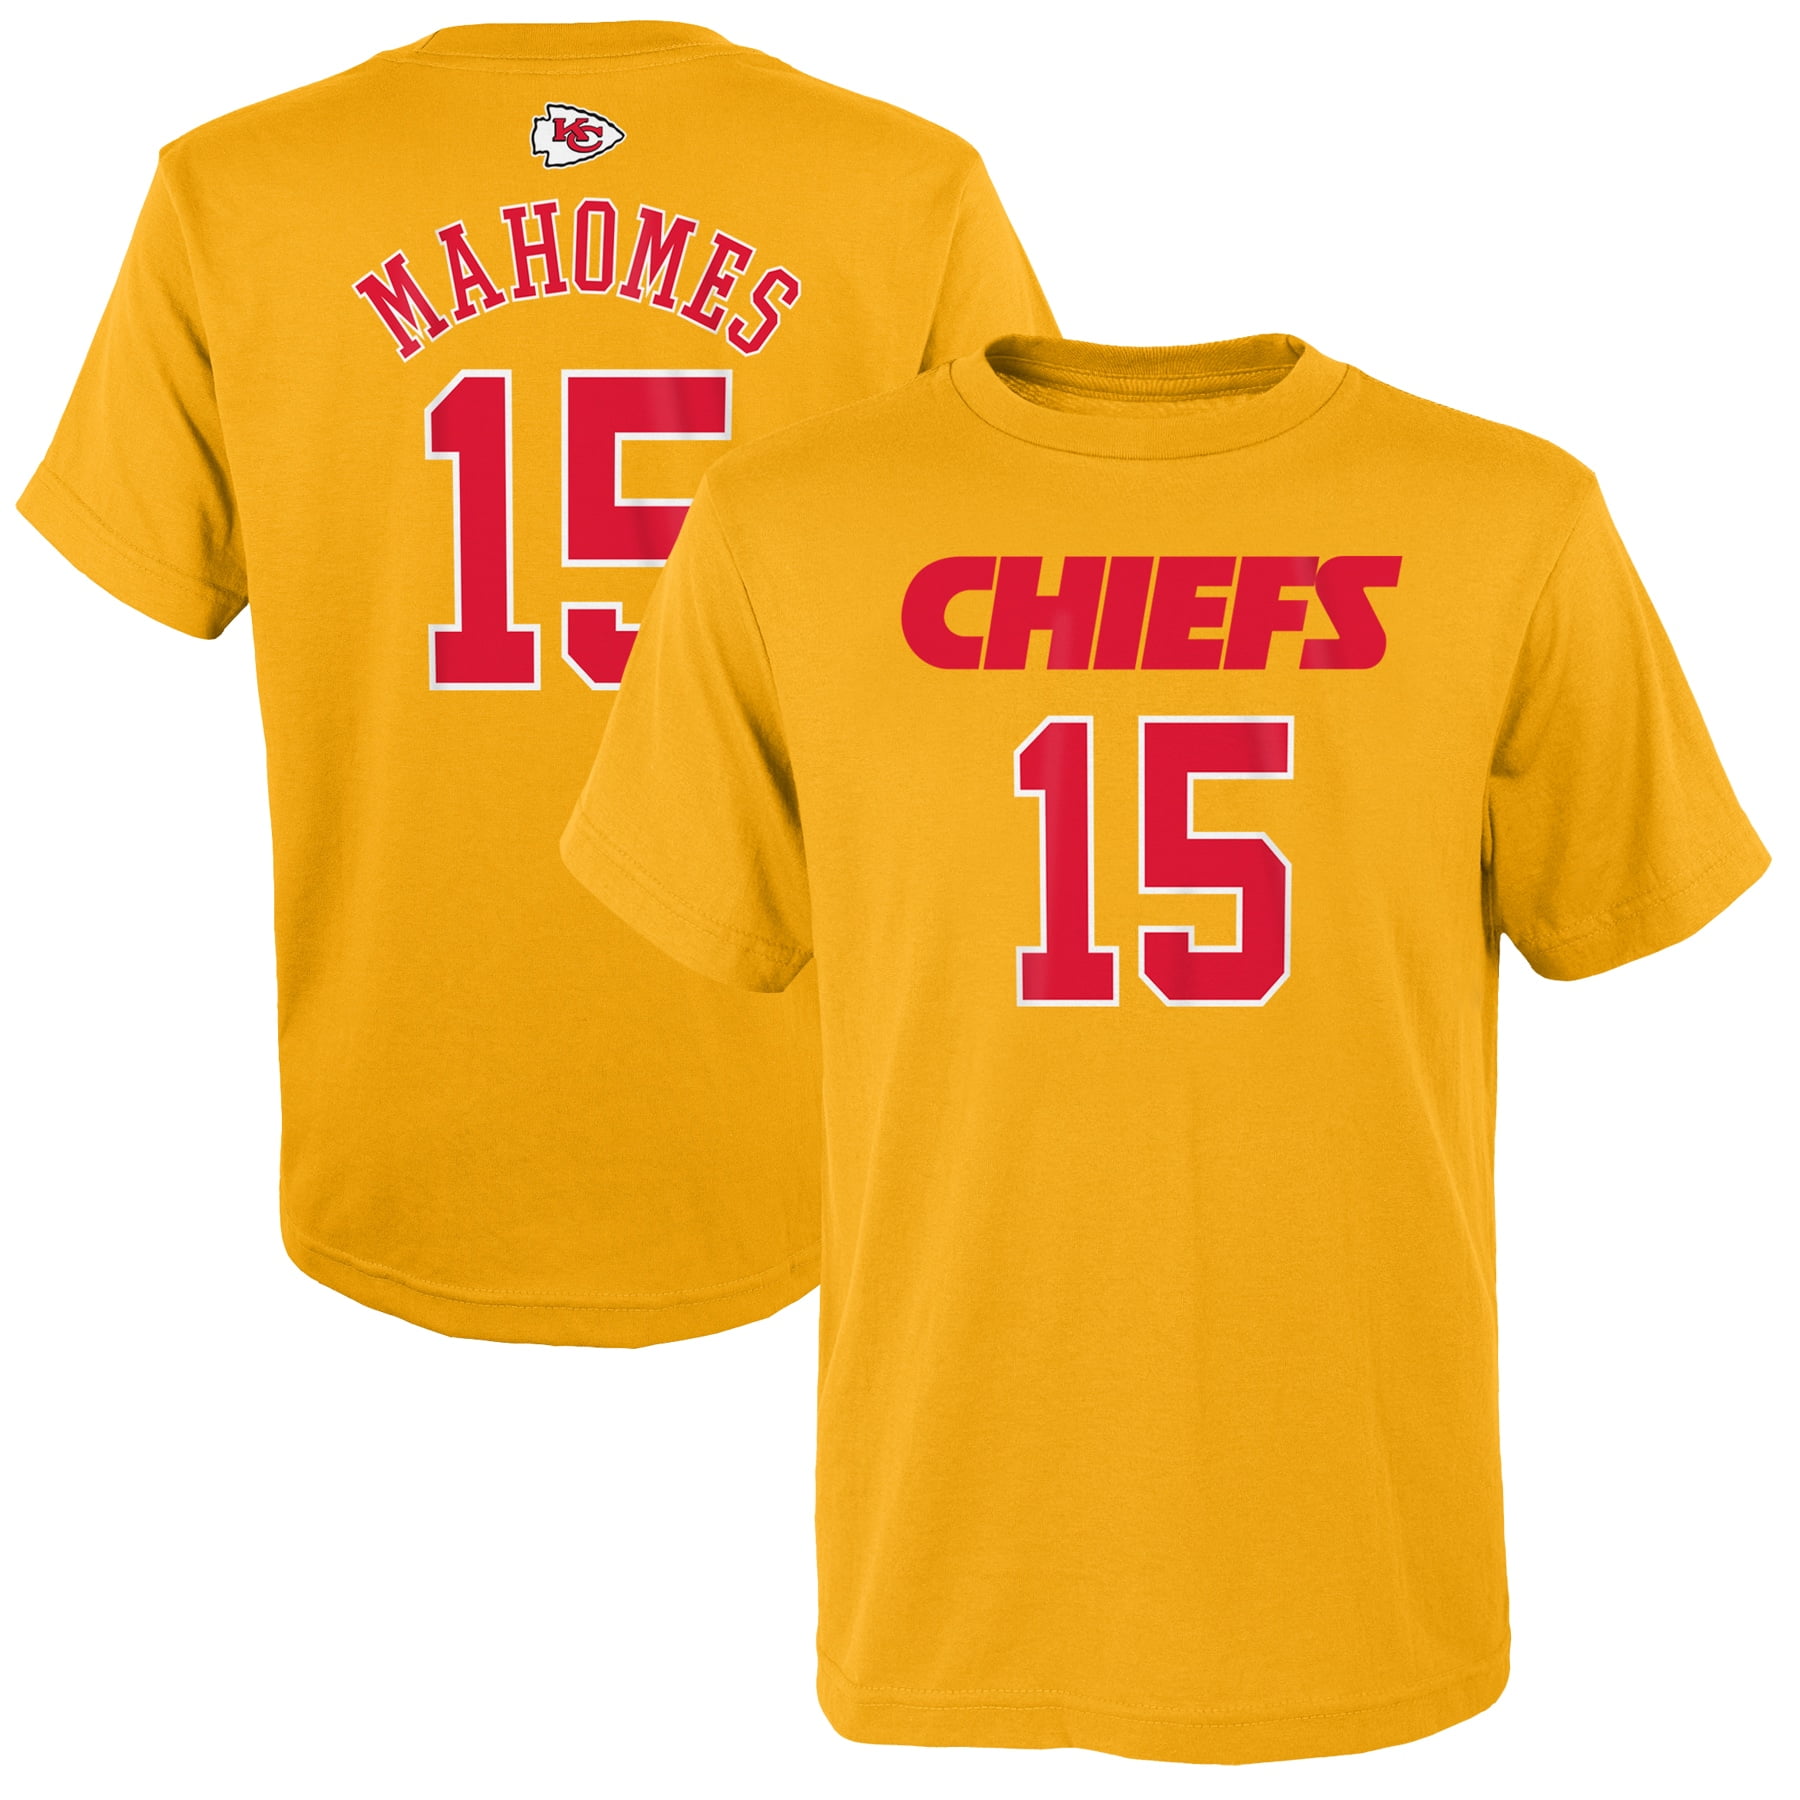 chiefs youth shirt